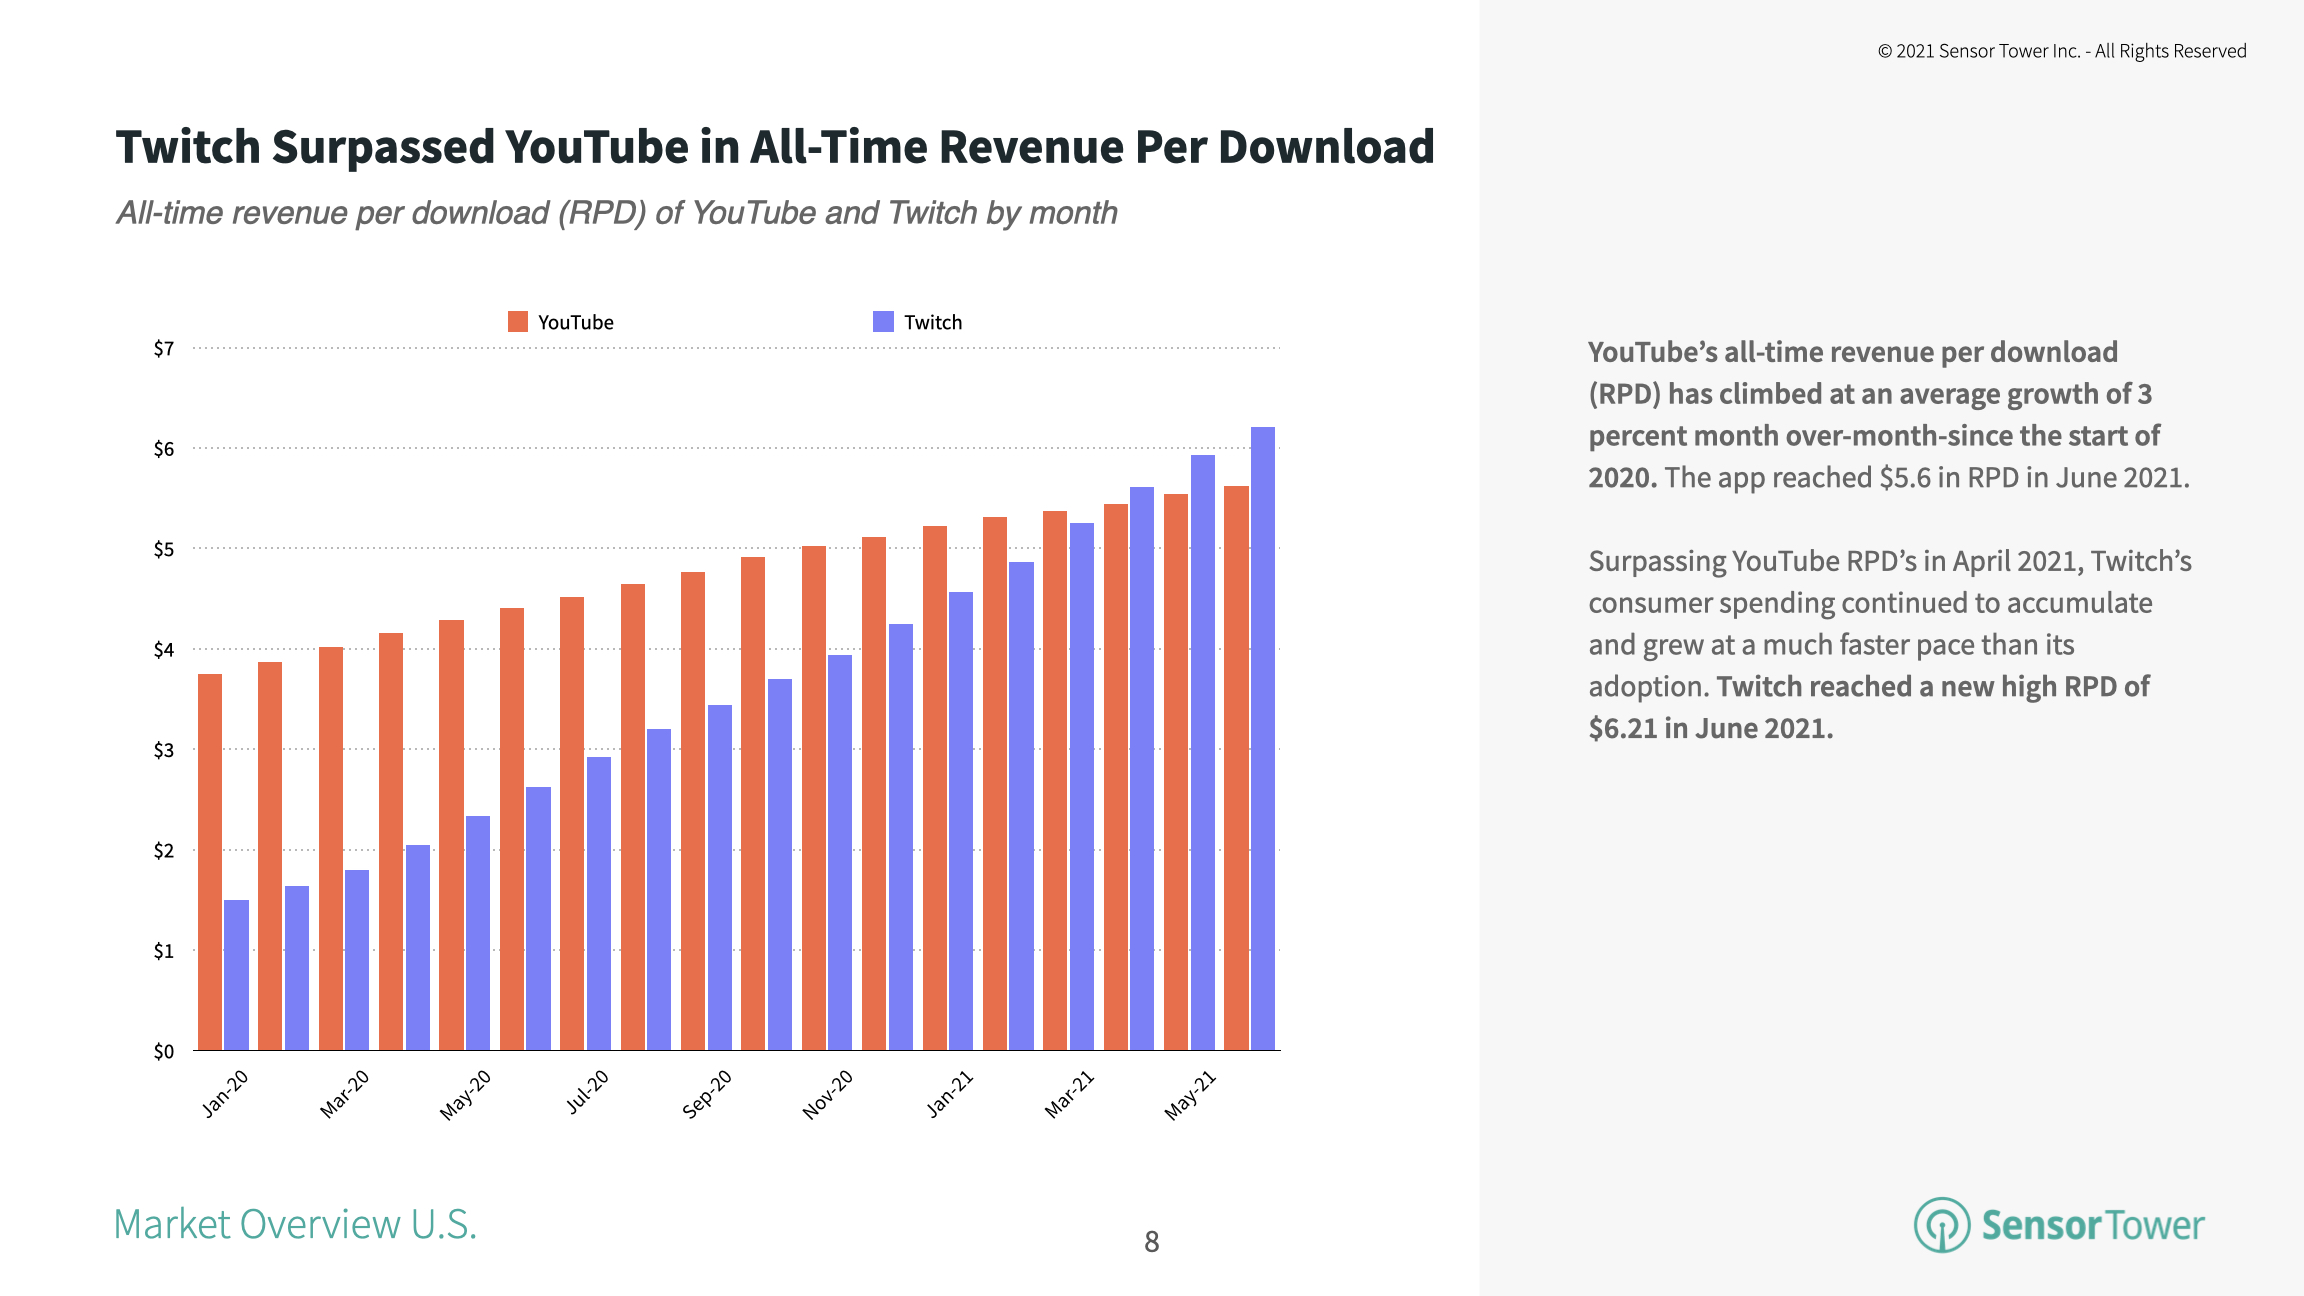 Twitch's all-time RPD overtook YouTube's in April 2021, reaching a new high of $6.20 in June